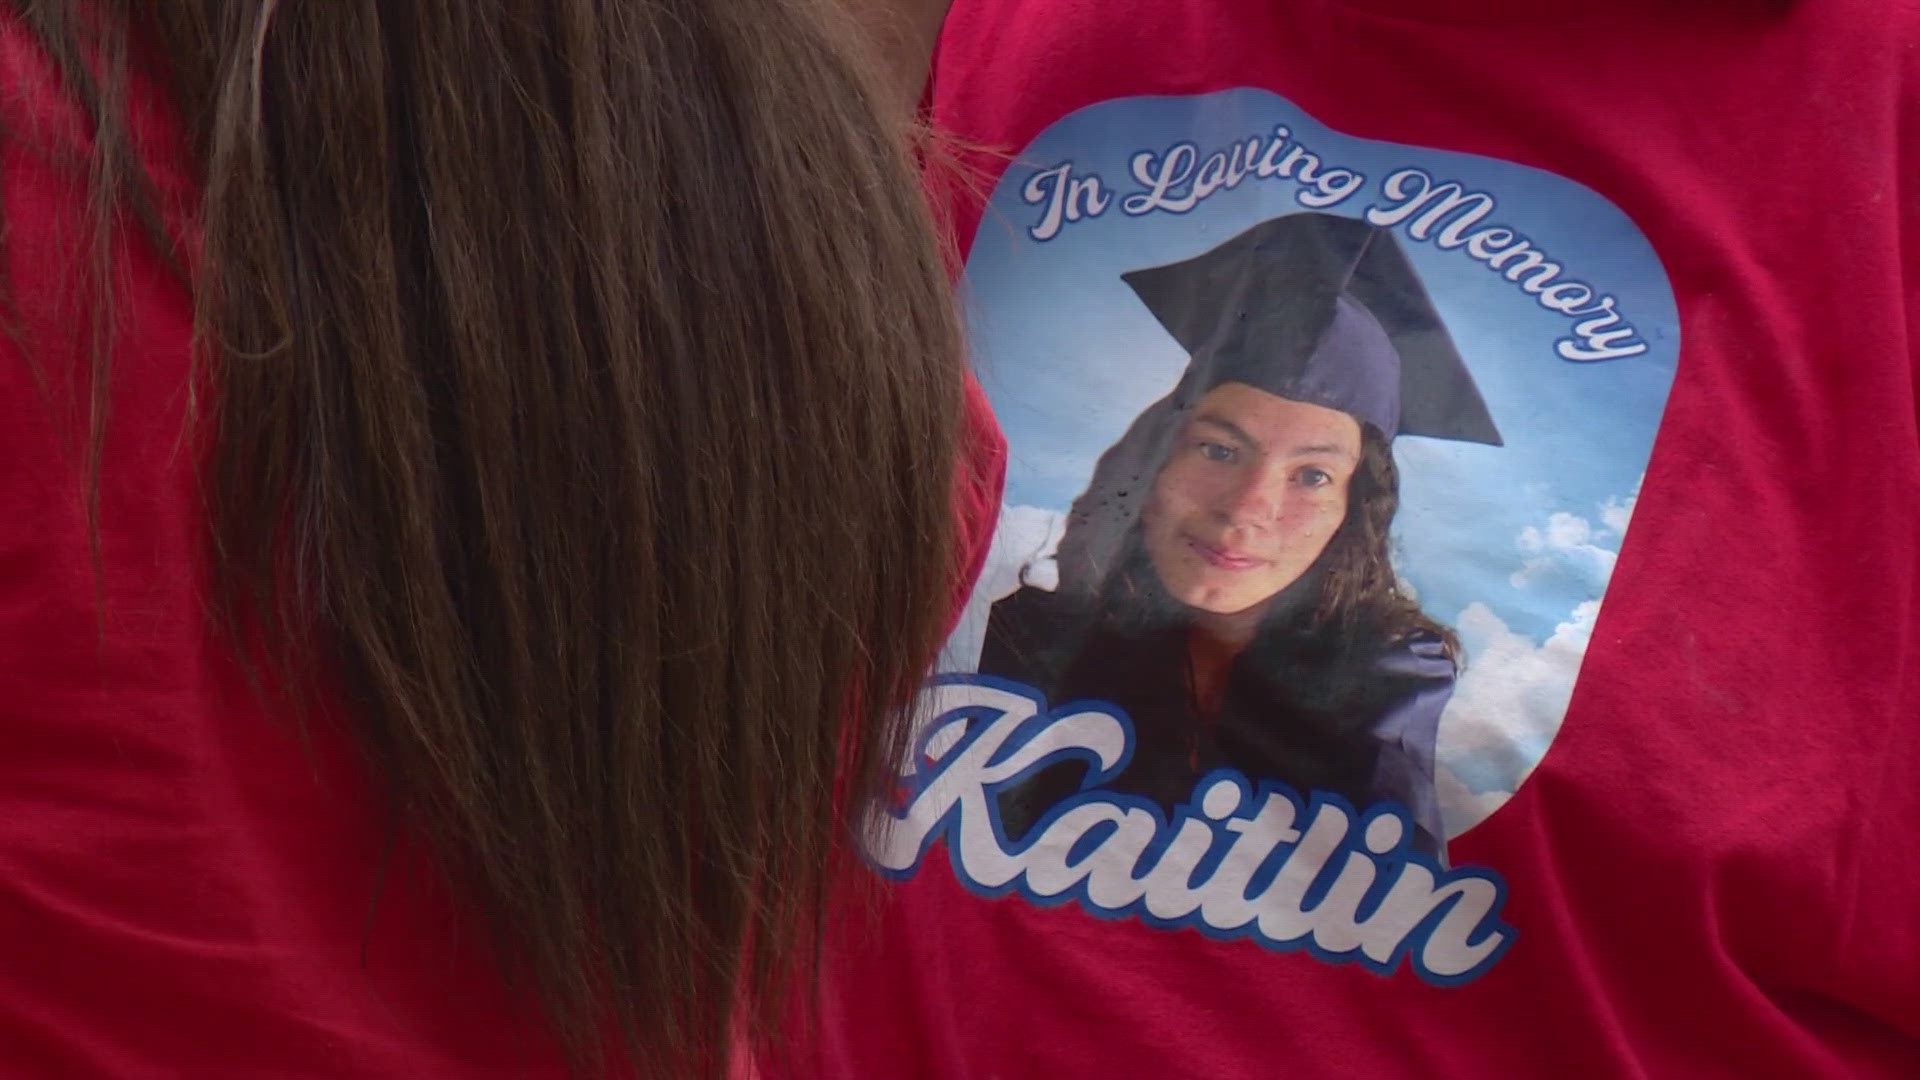 The family of 17-year-old Kaitlin Hernandez is speaking out after a 15-year-old was charged with capital murder in connection with her death.